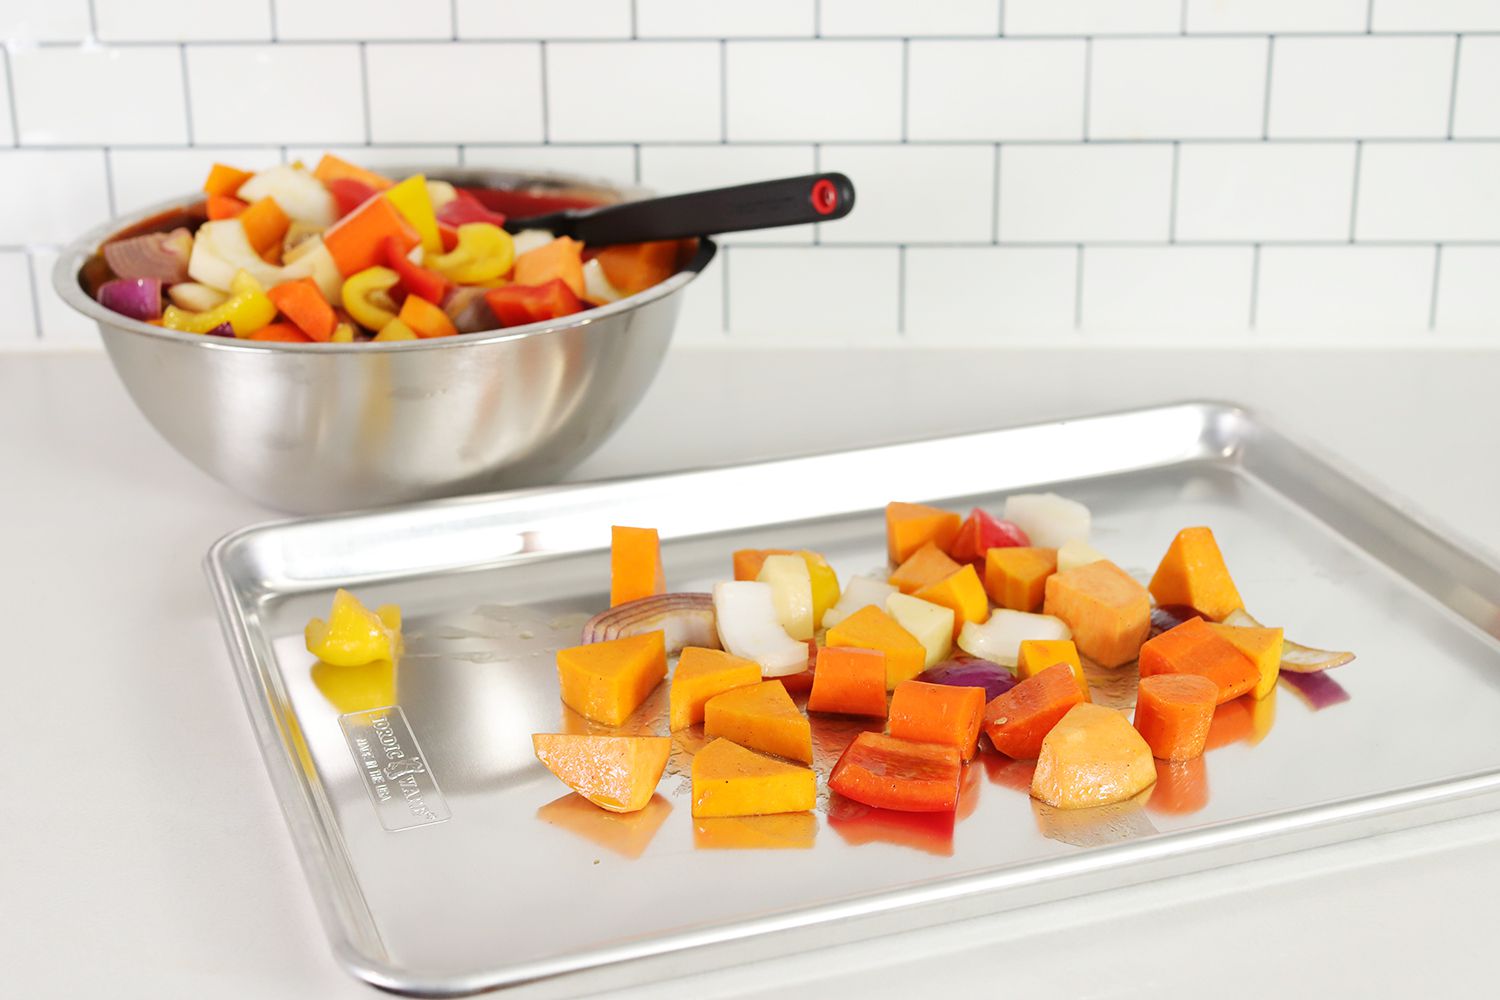 Nordic Ware Naturals Baker's Half Sheet with root vegetables and onion on a white counter